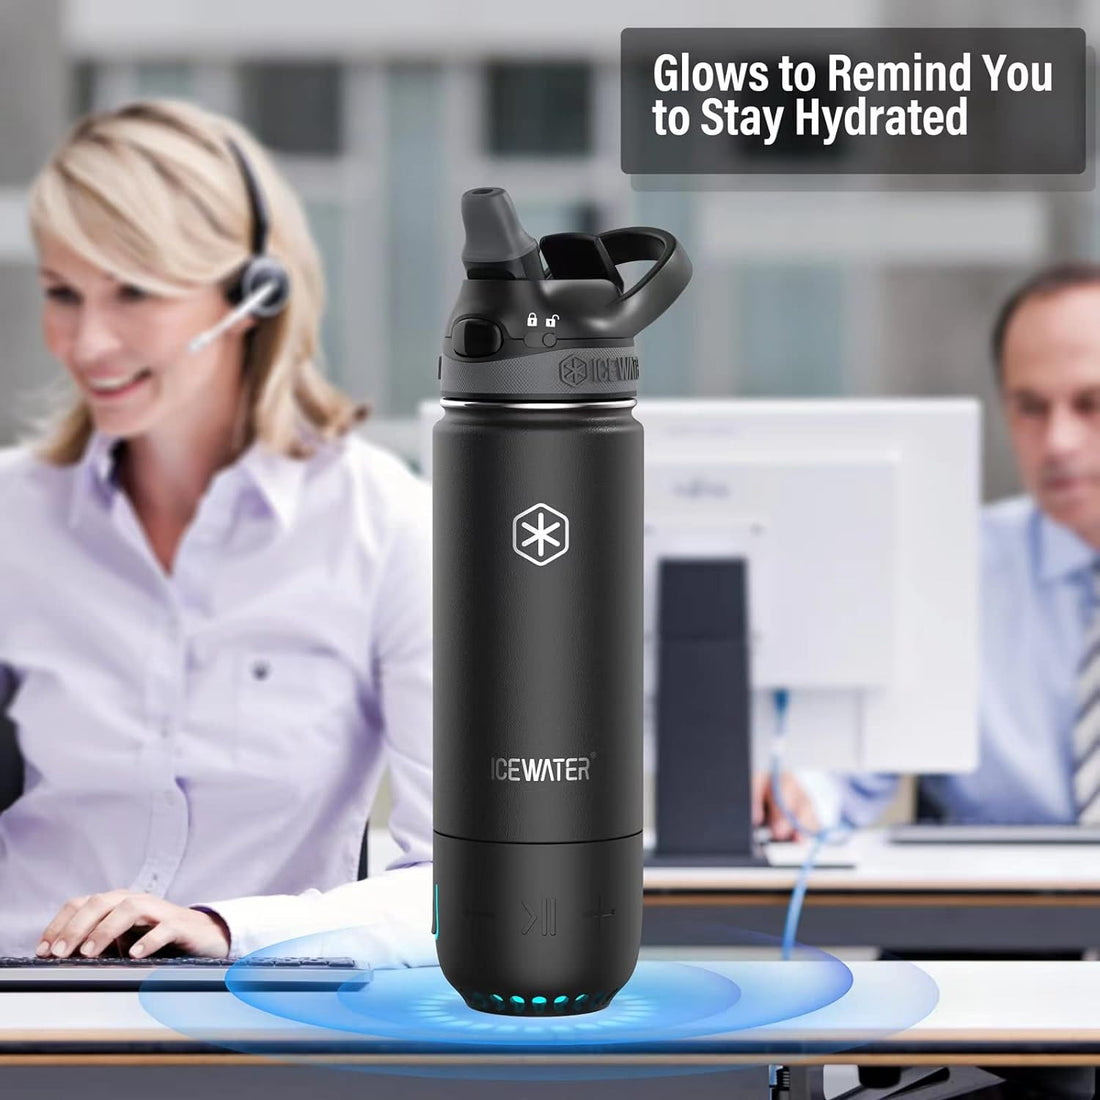 ICEWATER 3-in-1 Smart Water Bottle, Great Christmas Gift, Glows to Remind You to Keep Hydrated, Play Music & Dancing Lights, Vacuum Insulated, Stainless Steel, 18 oz (Insulated-Straw Lid, Black)